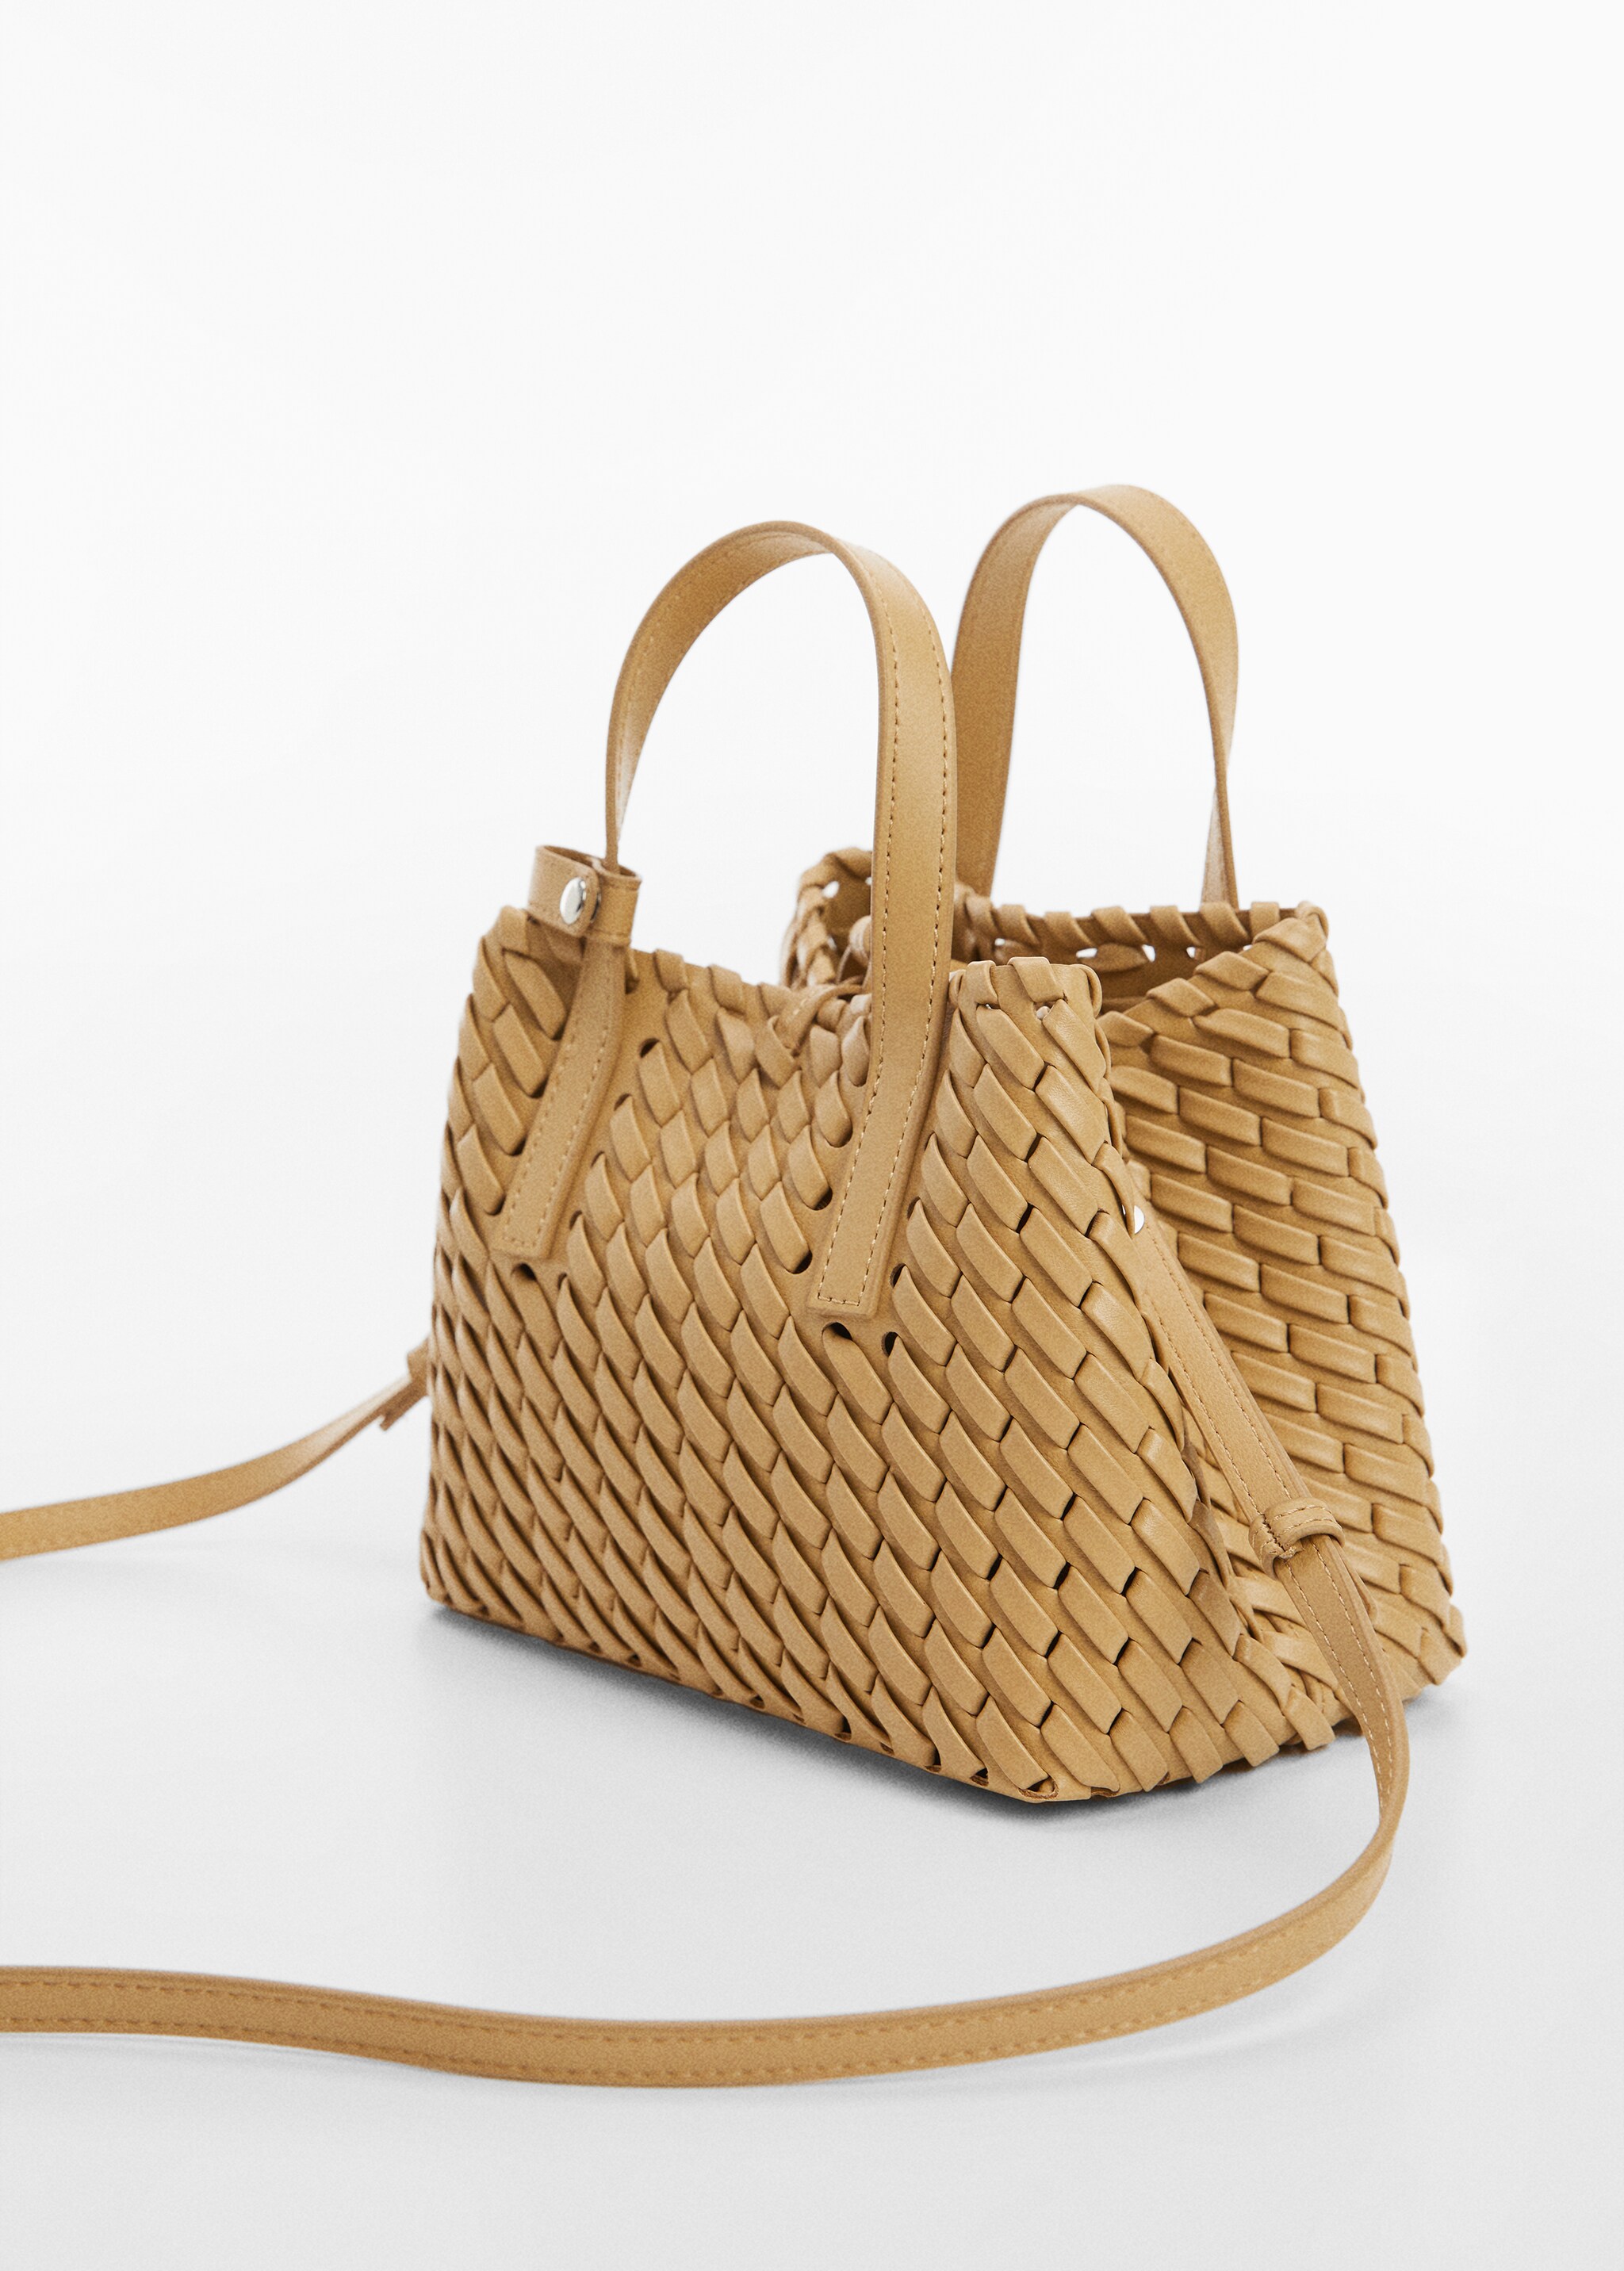 Double handle braided bag - Details of the article 2